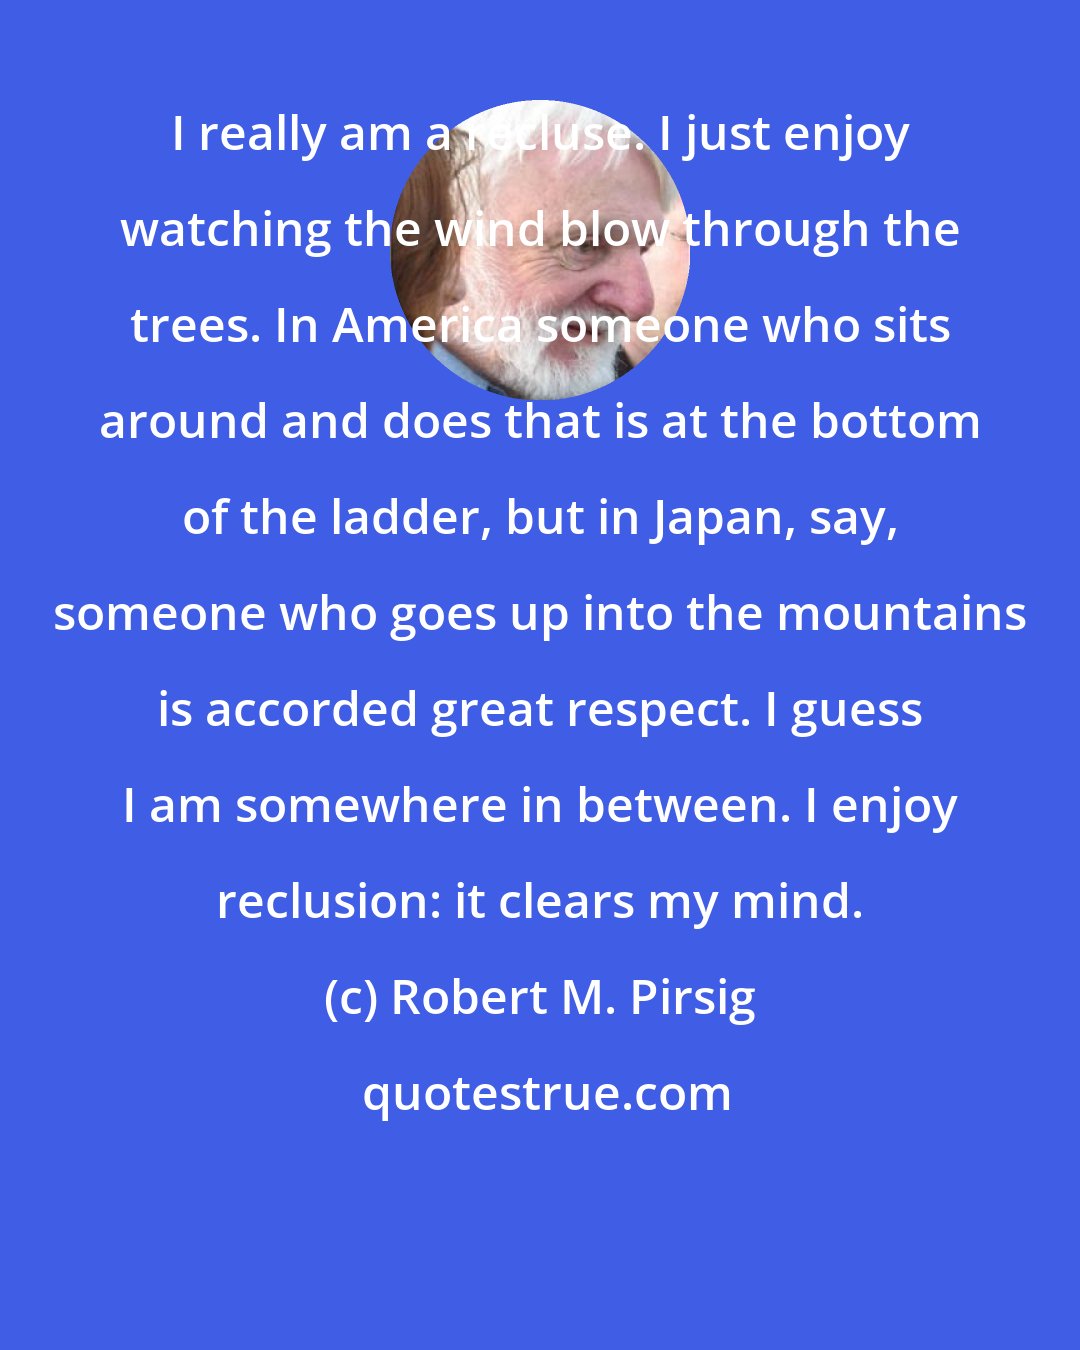 Robert M. Pirsig: I really am a recluse. I just enjoy watching the wind blow through the trees. In America someone who sits around and does that is at the bottom of the ladder, but in Japan, say, someone who goes up into the mountains is accorded great respect. I guess I am somewhere in between. I enjoy reclusion: it clears my mind.